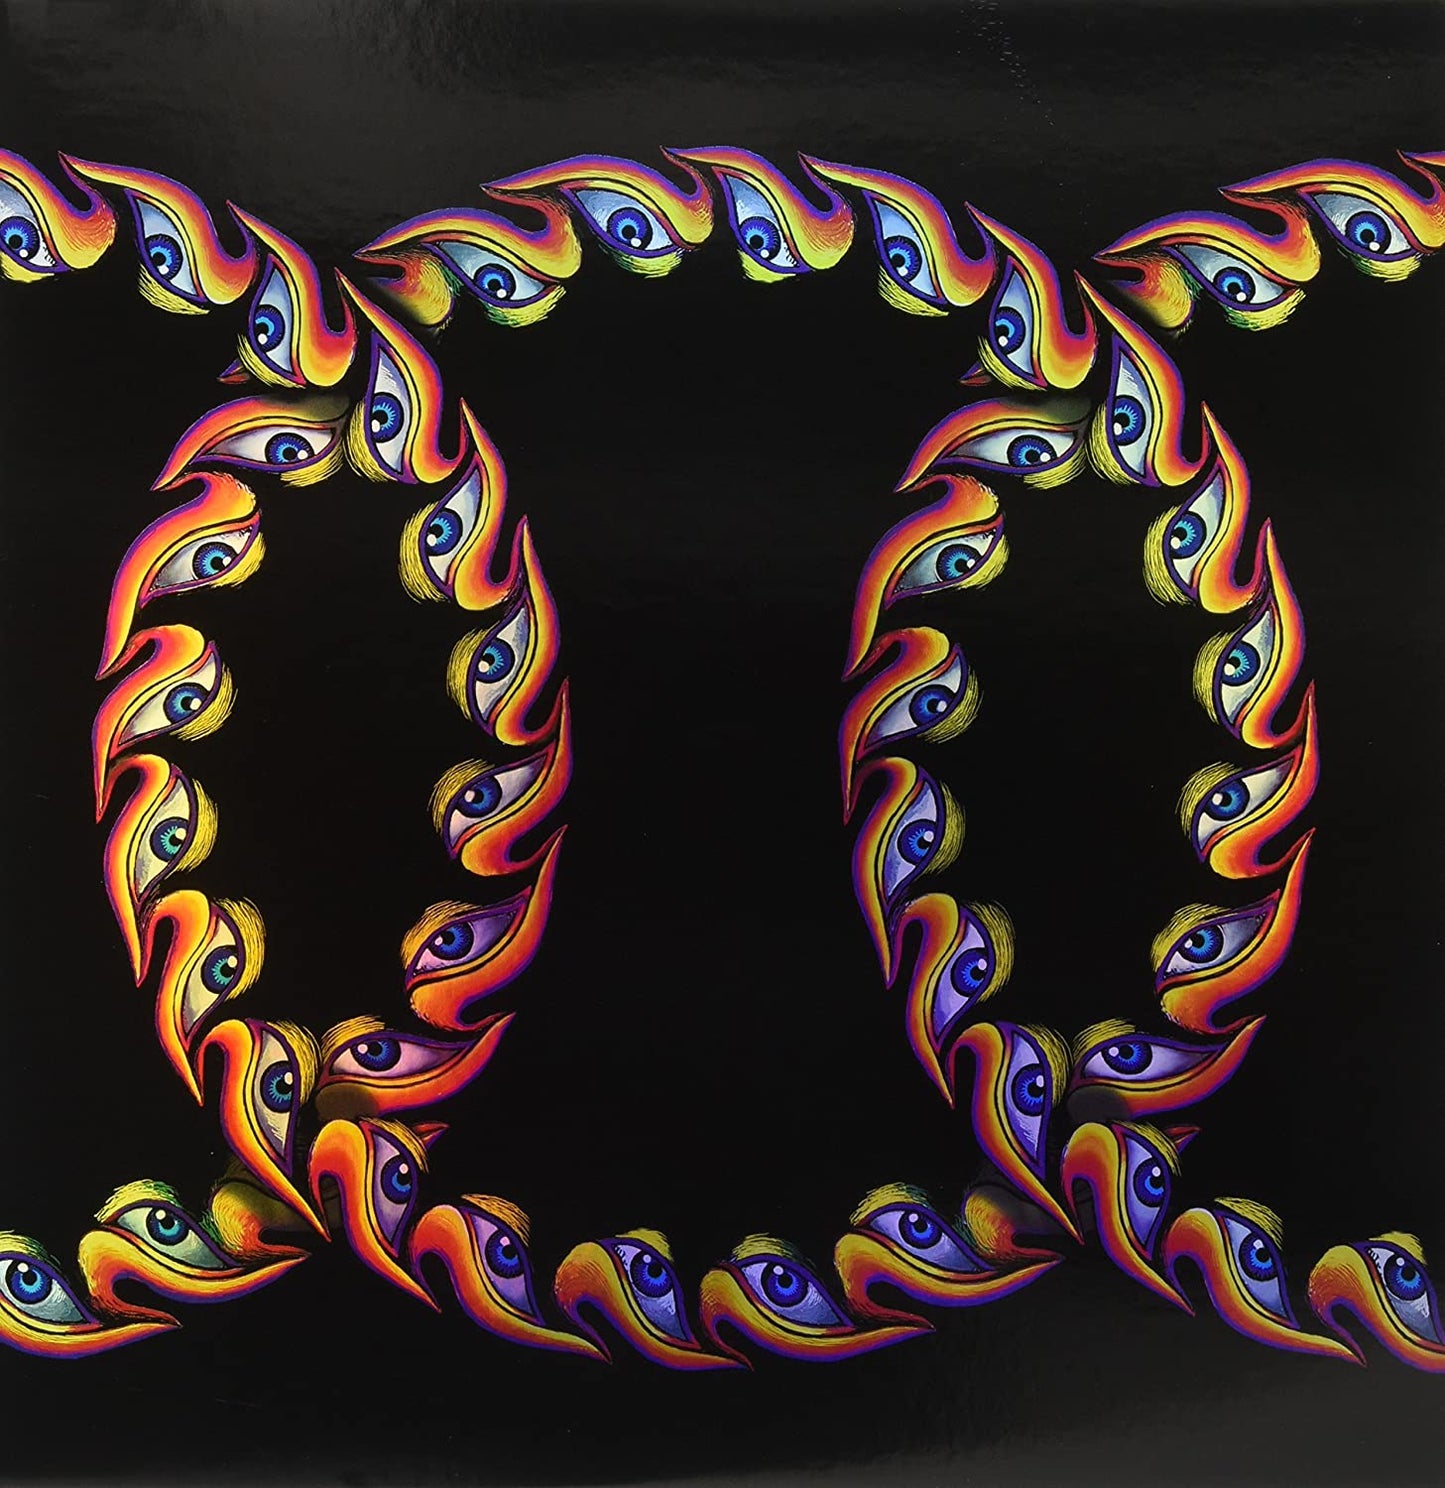 Tool - Lateralus - 614223116013 - LP's - Yellow Racket Records